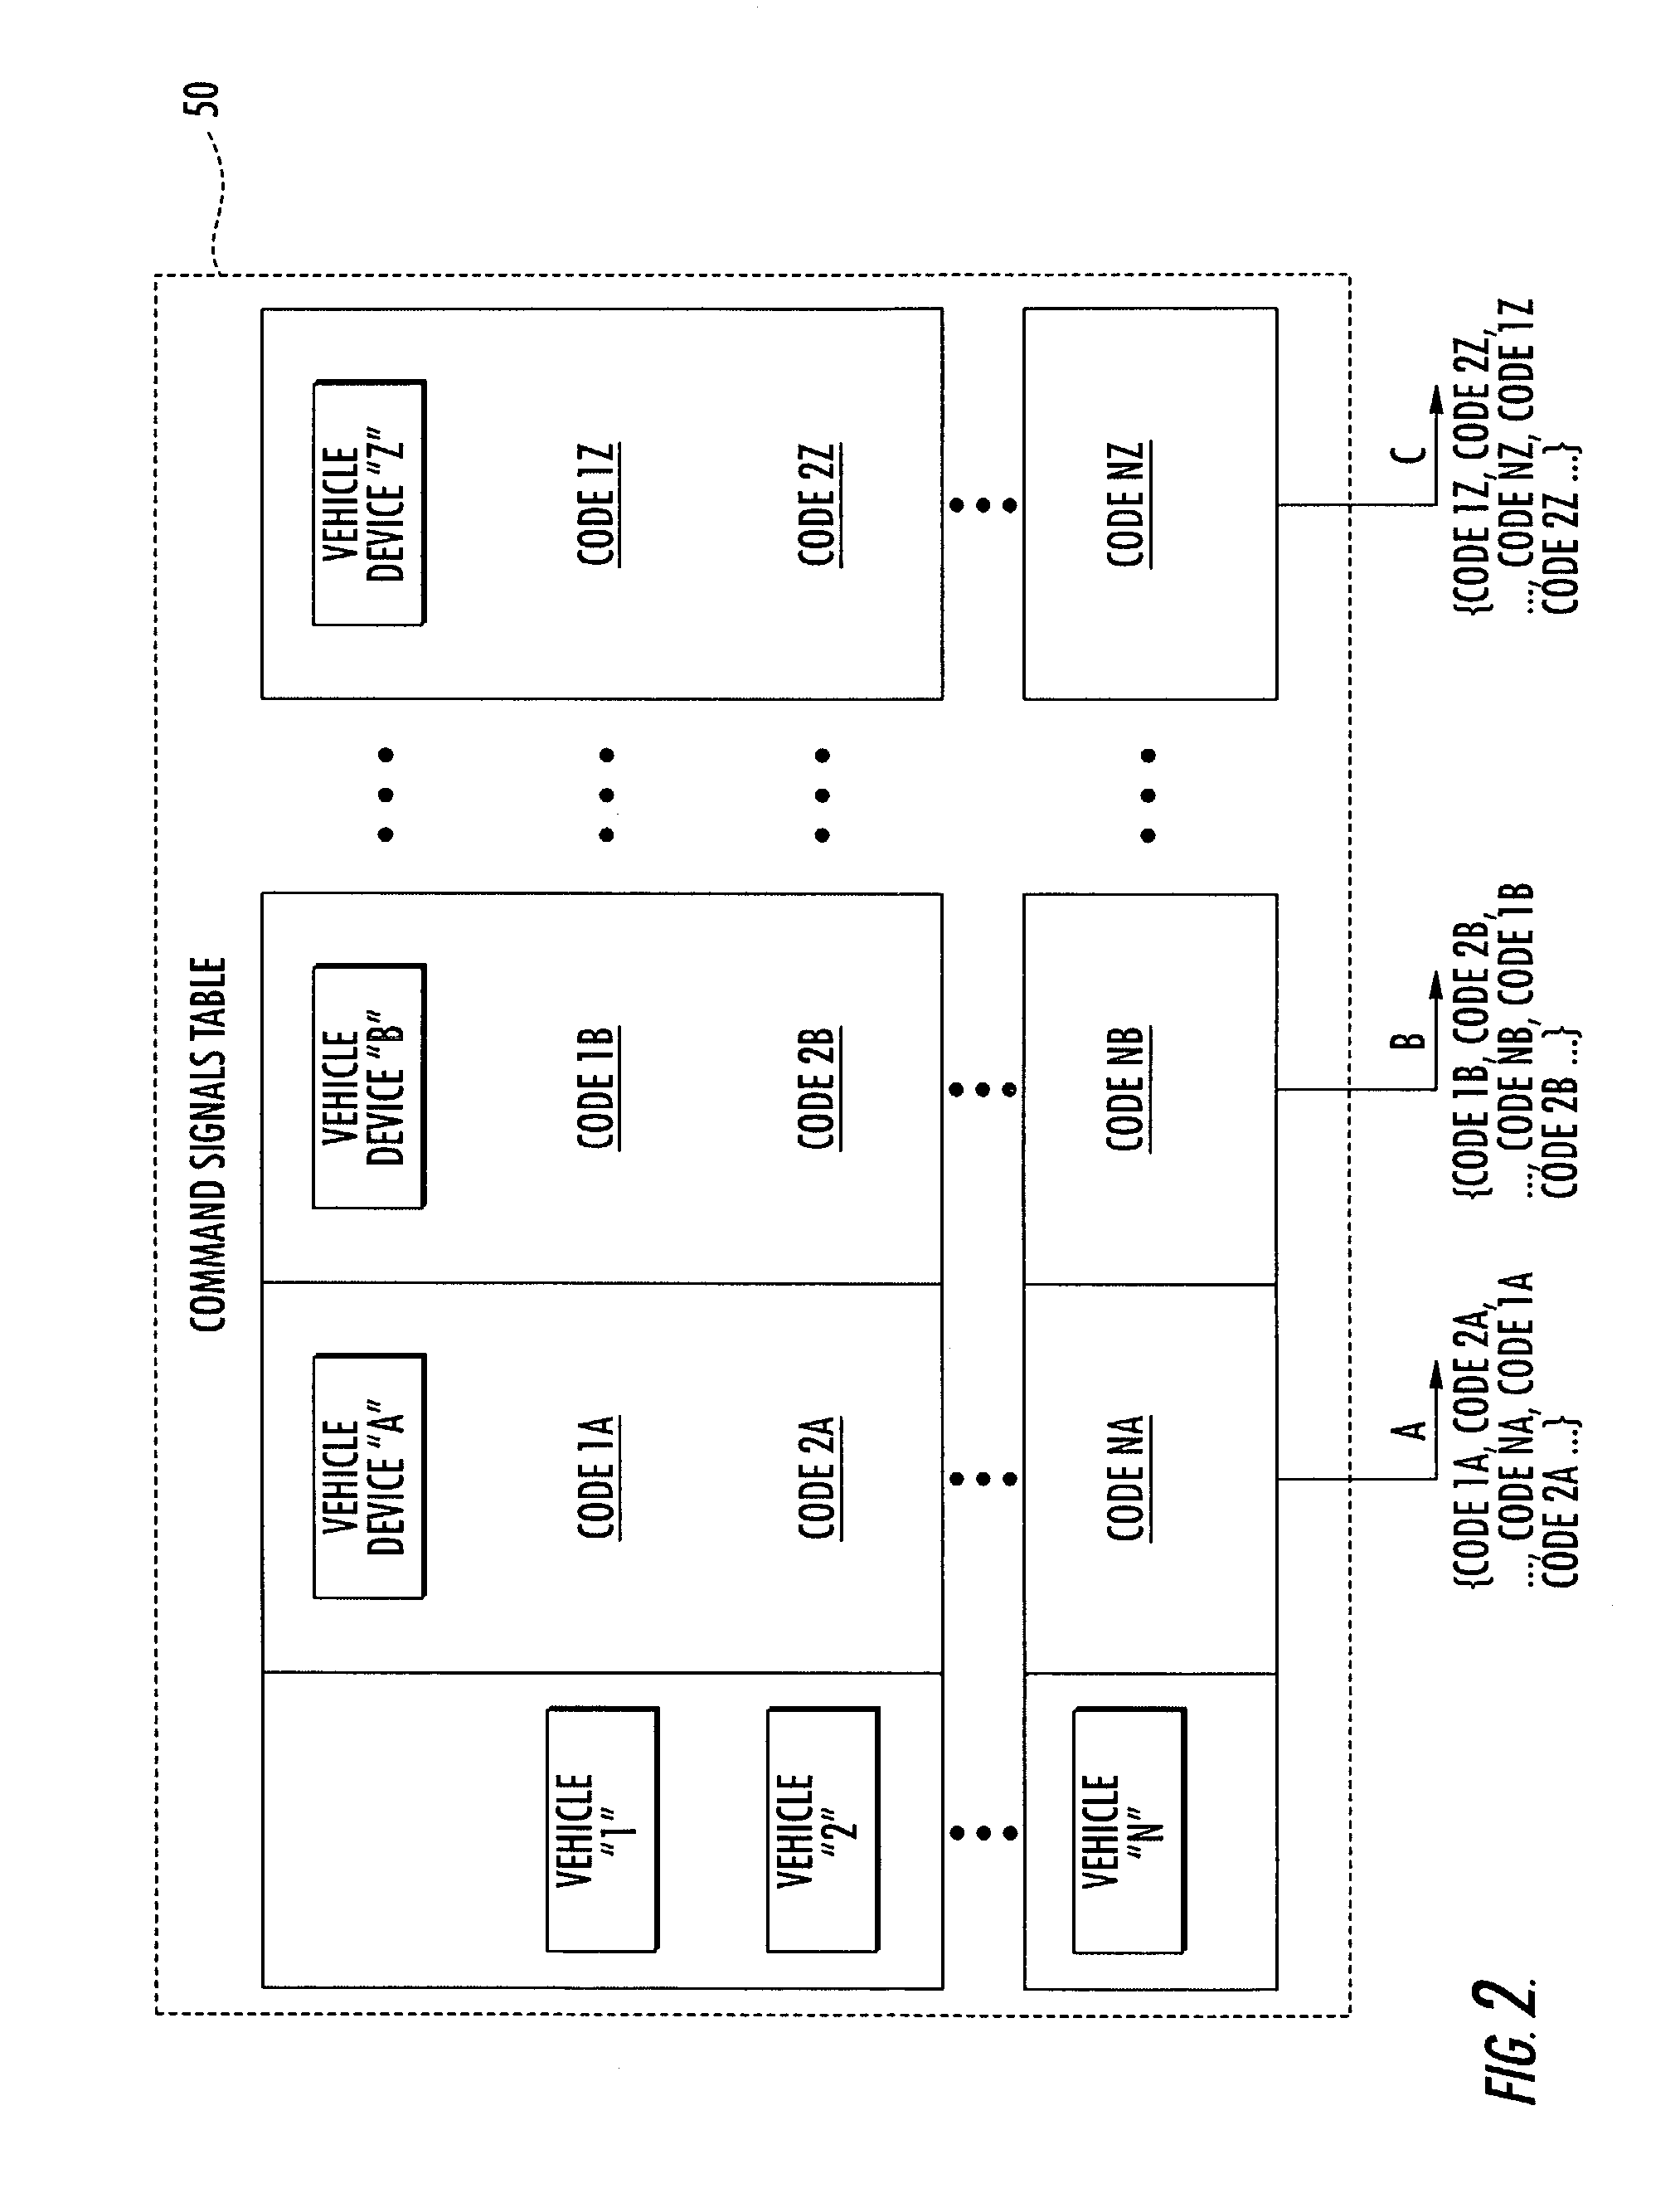 Vehicle window control system for a vehicle having a data communications bus and associated methods